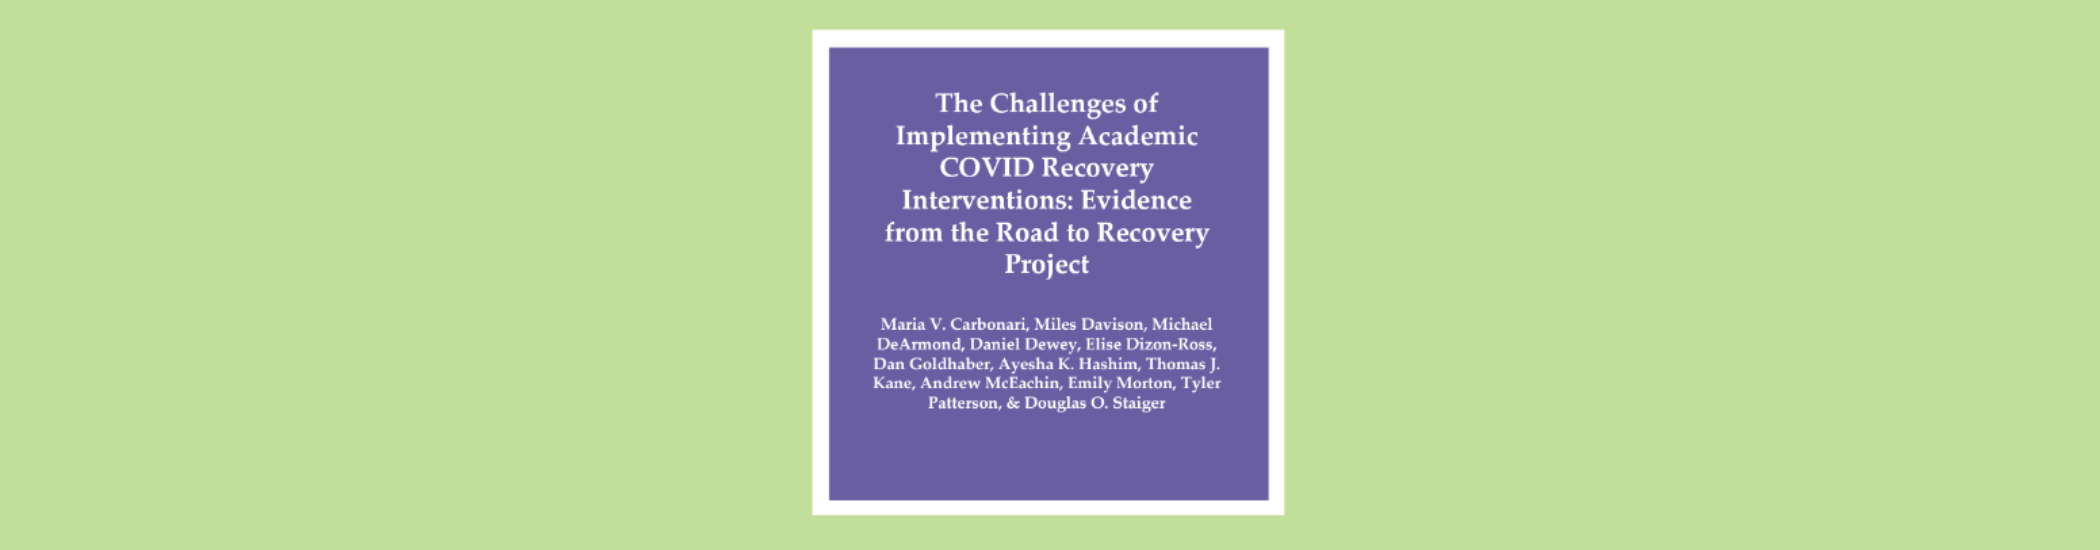 Cover of new working paper | The Challenges of Implementing Academic COVID Recovery Interventions: Evidence from the Road to Recovery Project